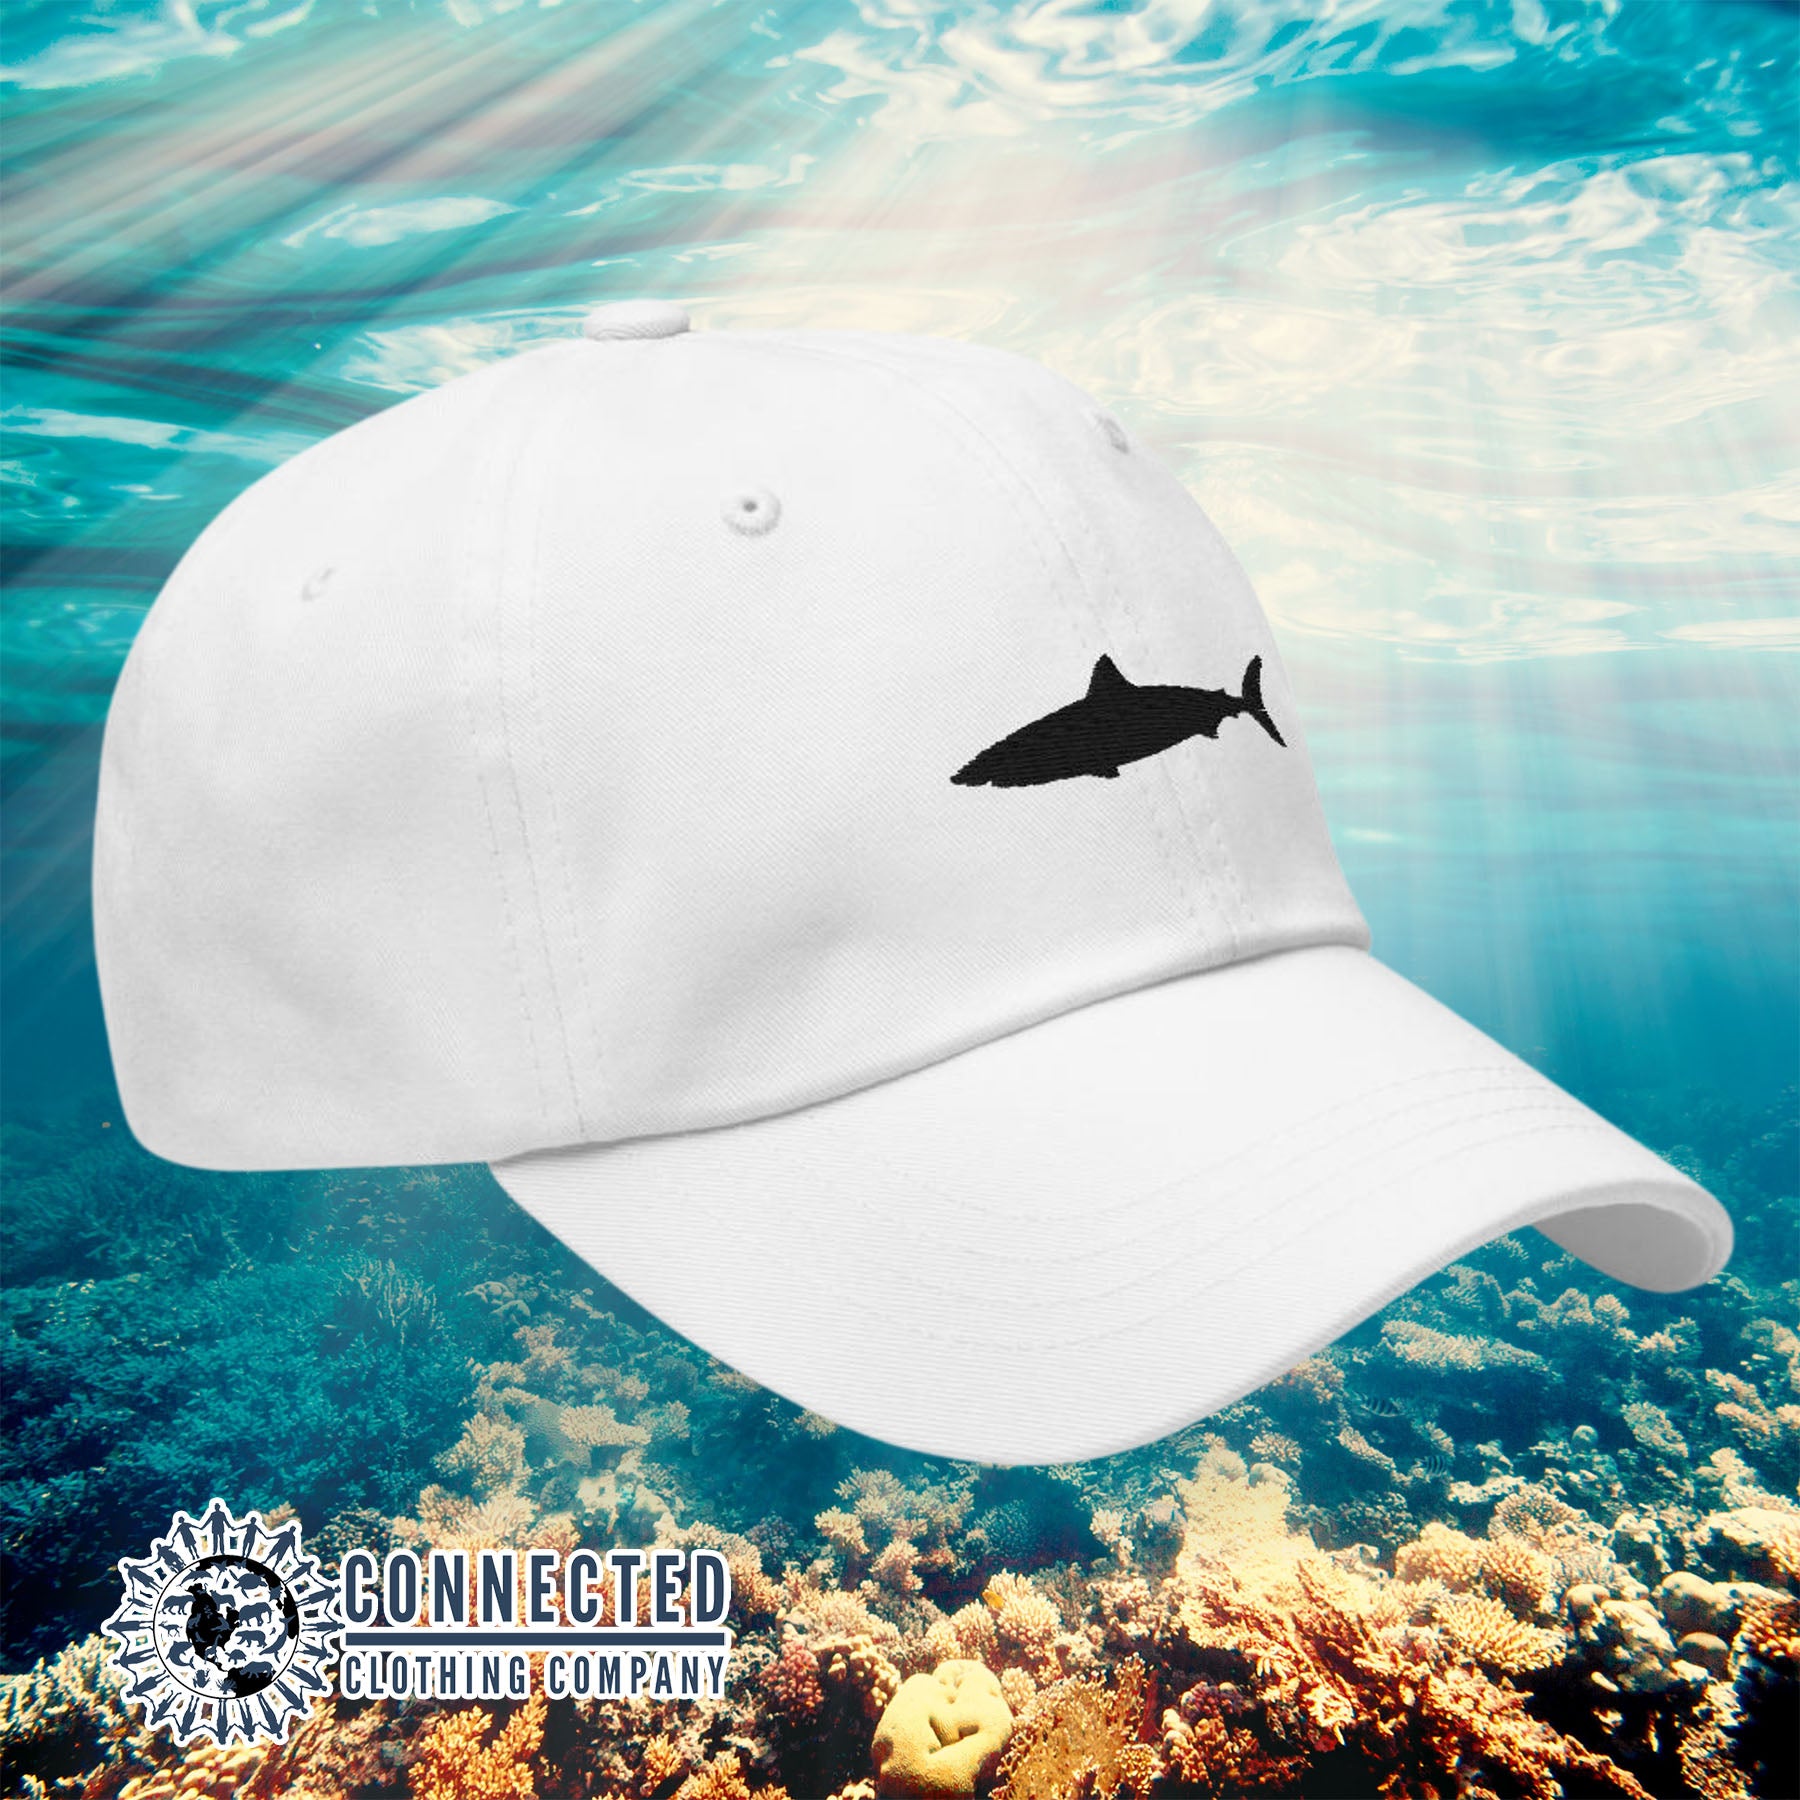 White Shark Cotton Cap - sweetsherriloudesigns - Ethical & Sustainable Clothing That Gives Back - 10% donated to Oceana shark conservation